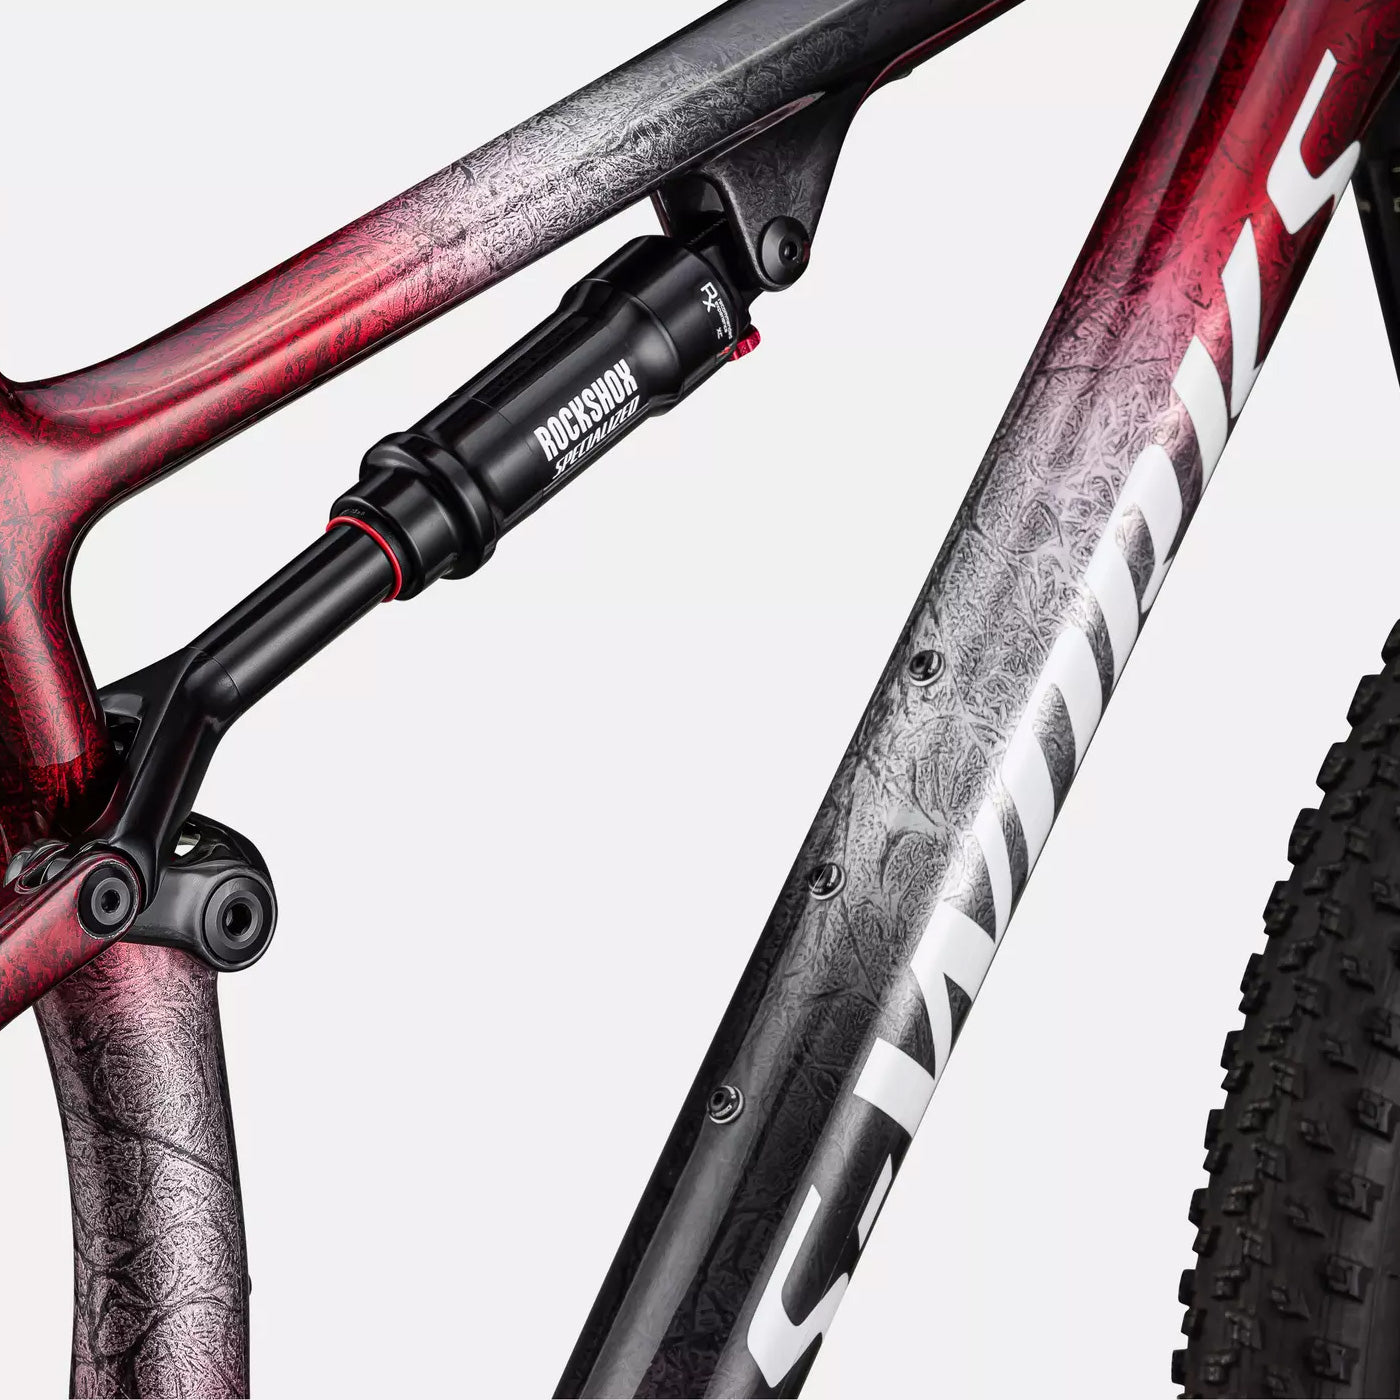 Specialized S-Works Epic - Rosso